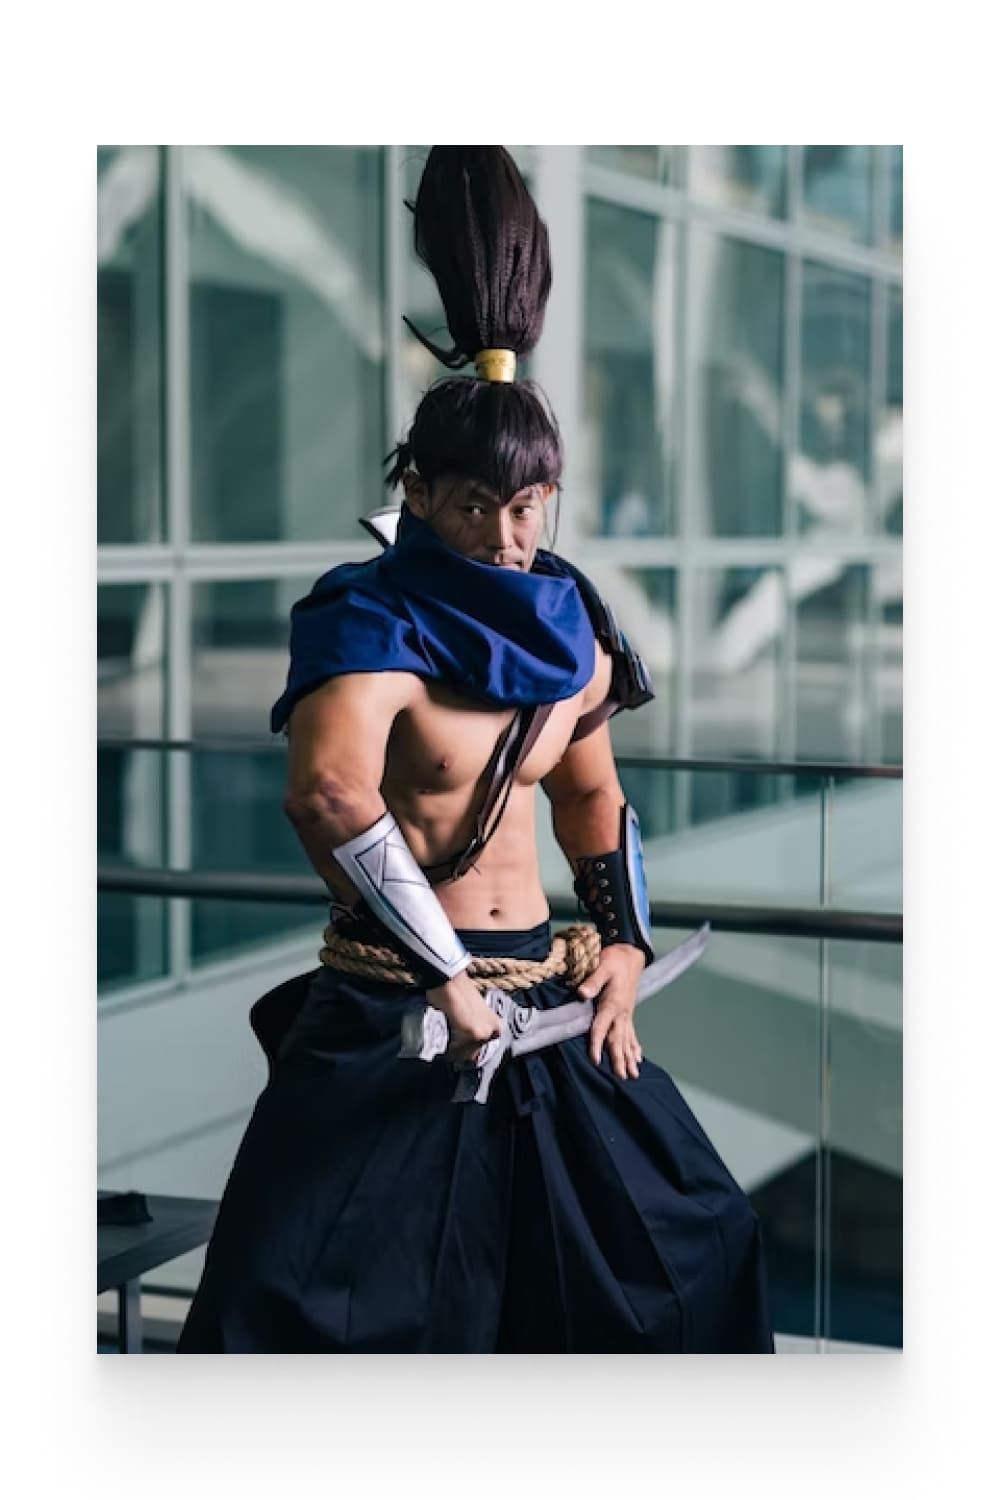 Yasuo from League of Legends with sword.